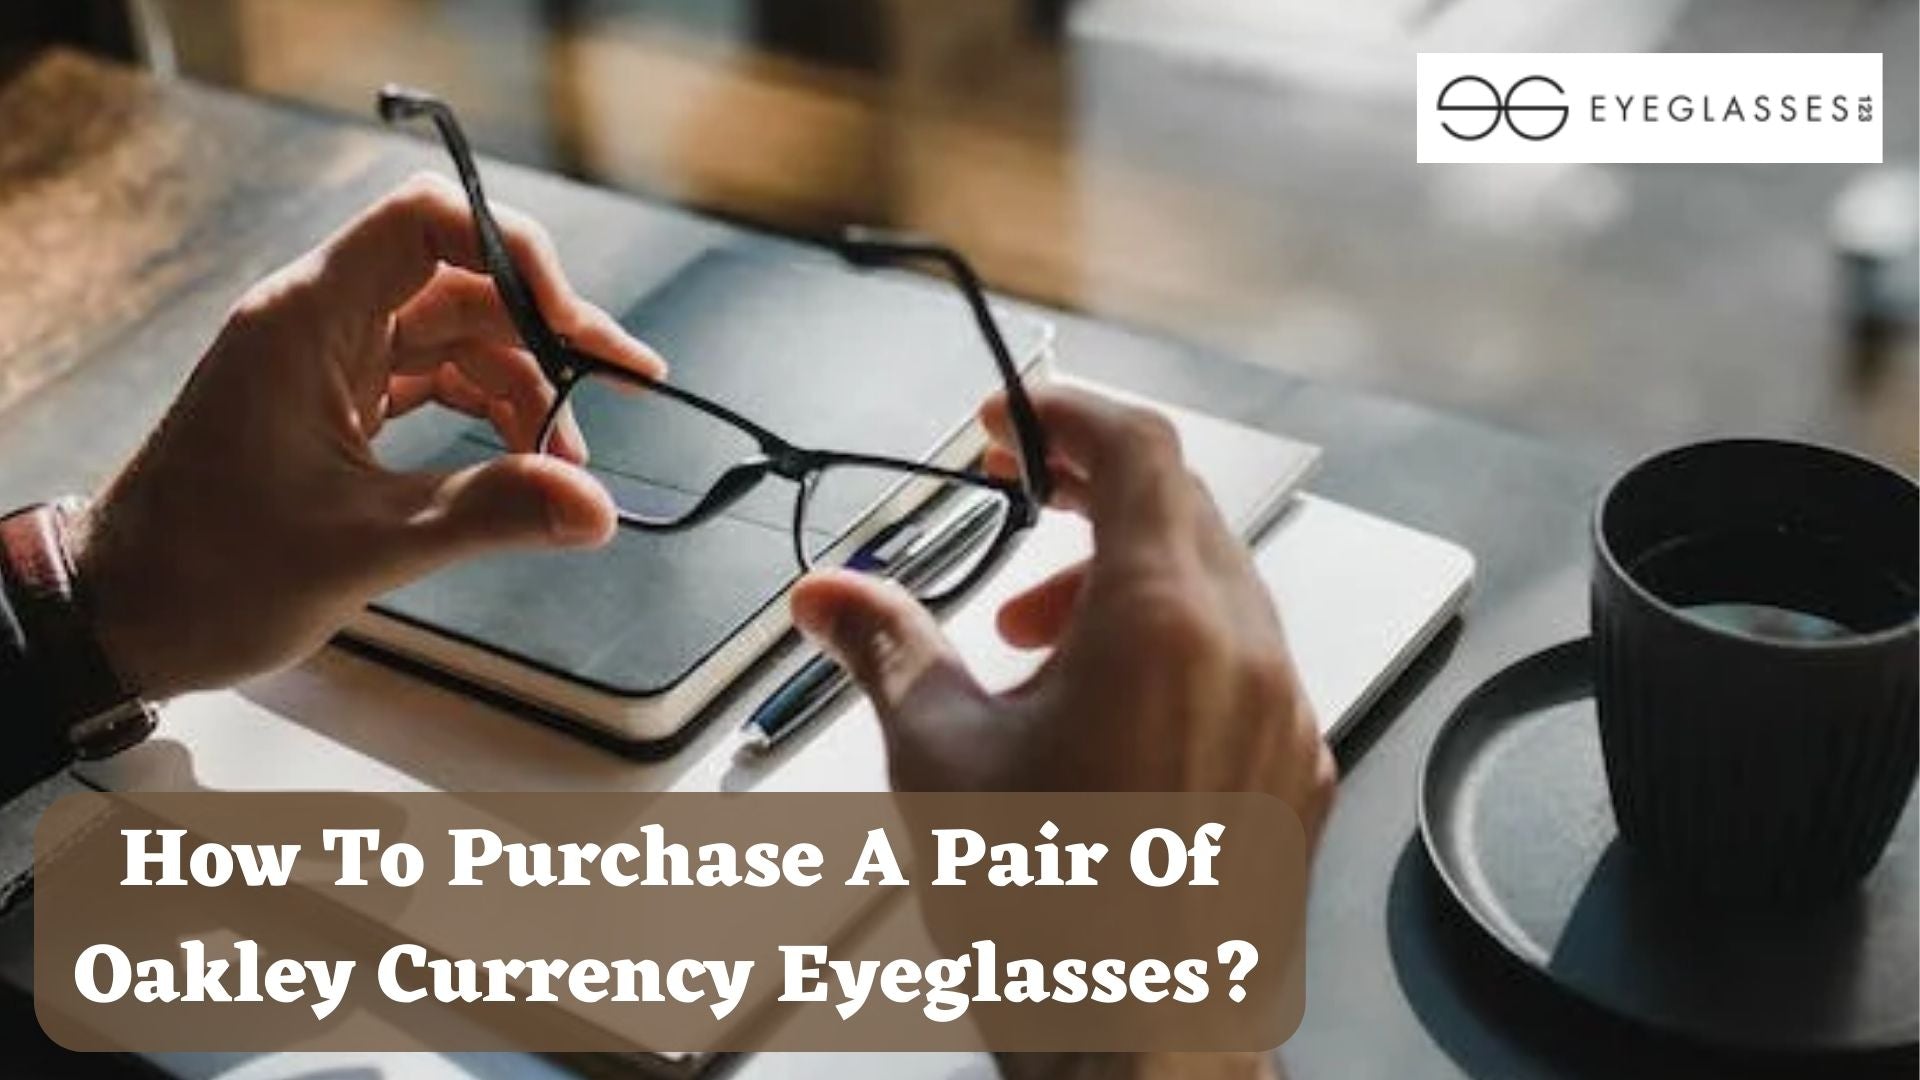 How To Purchase A Pair Of Oakley Currency Eyeglasses?